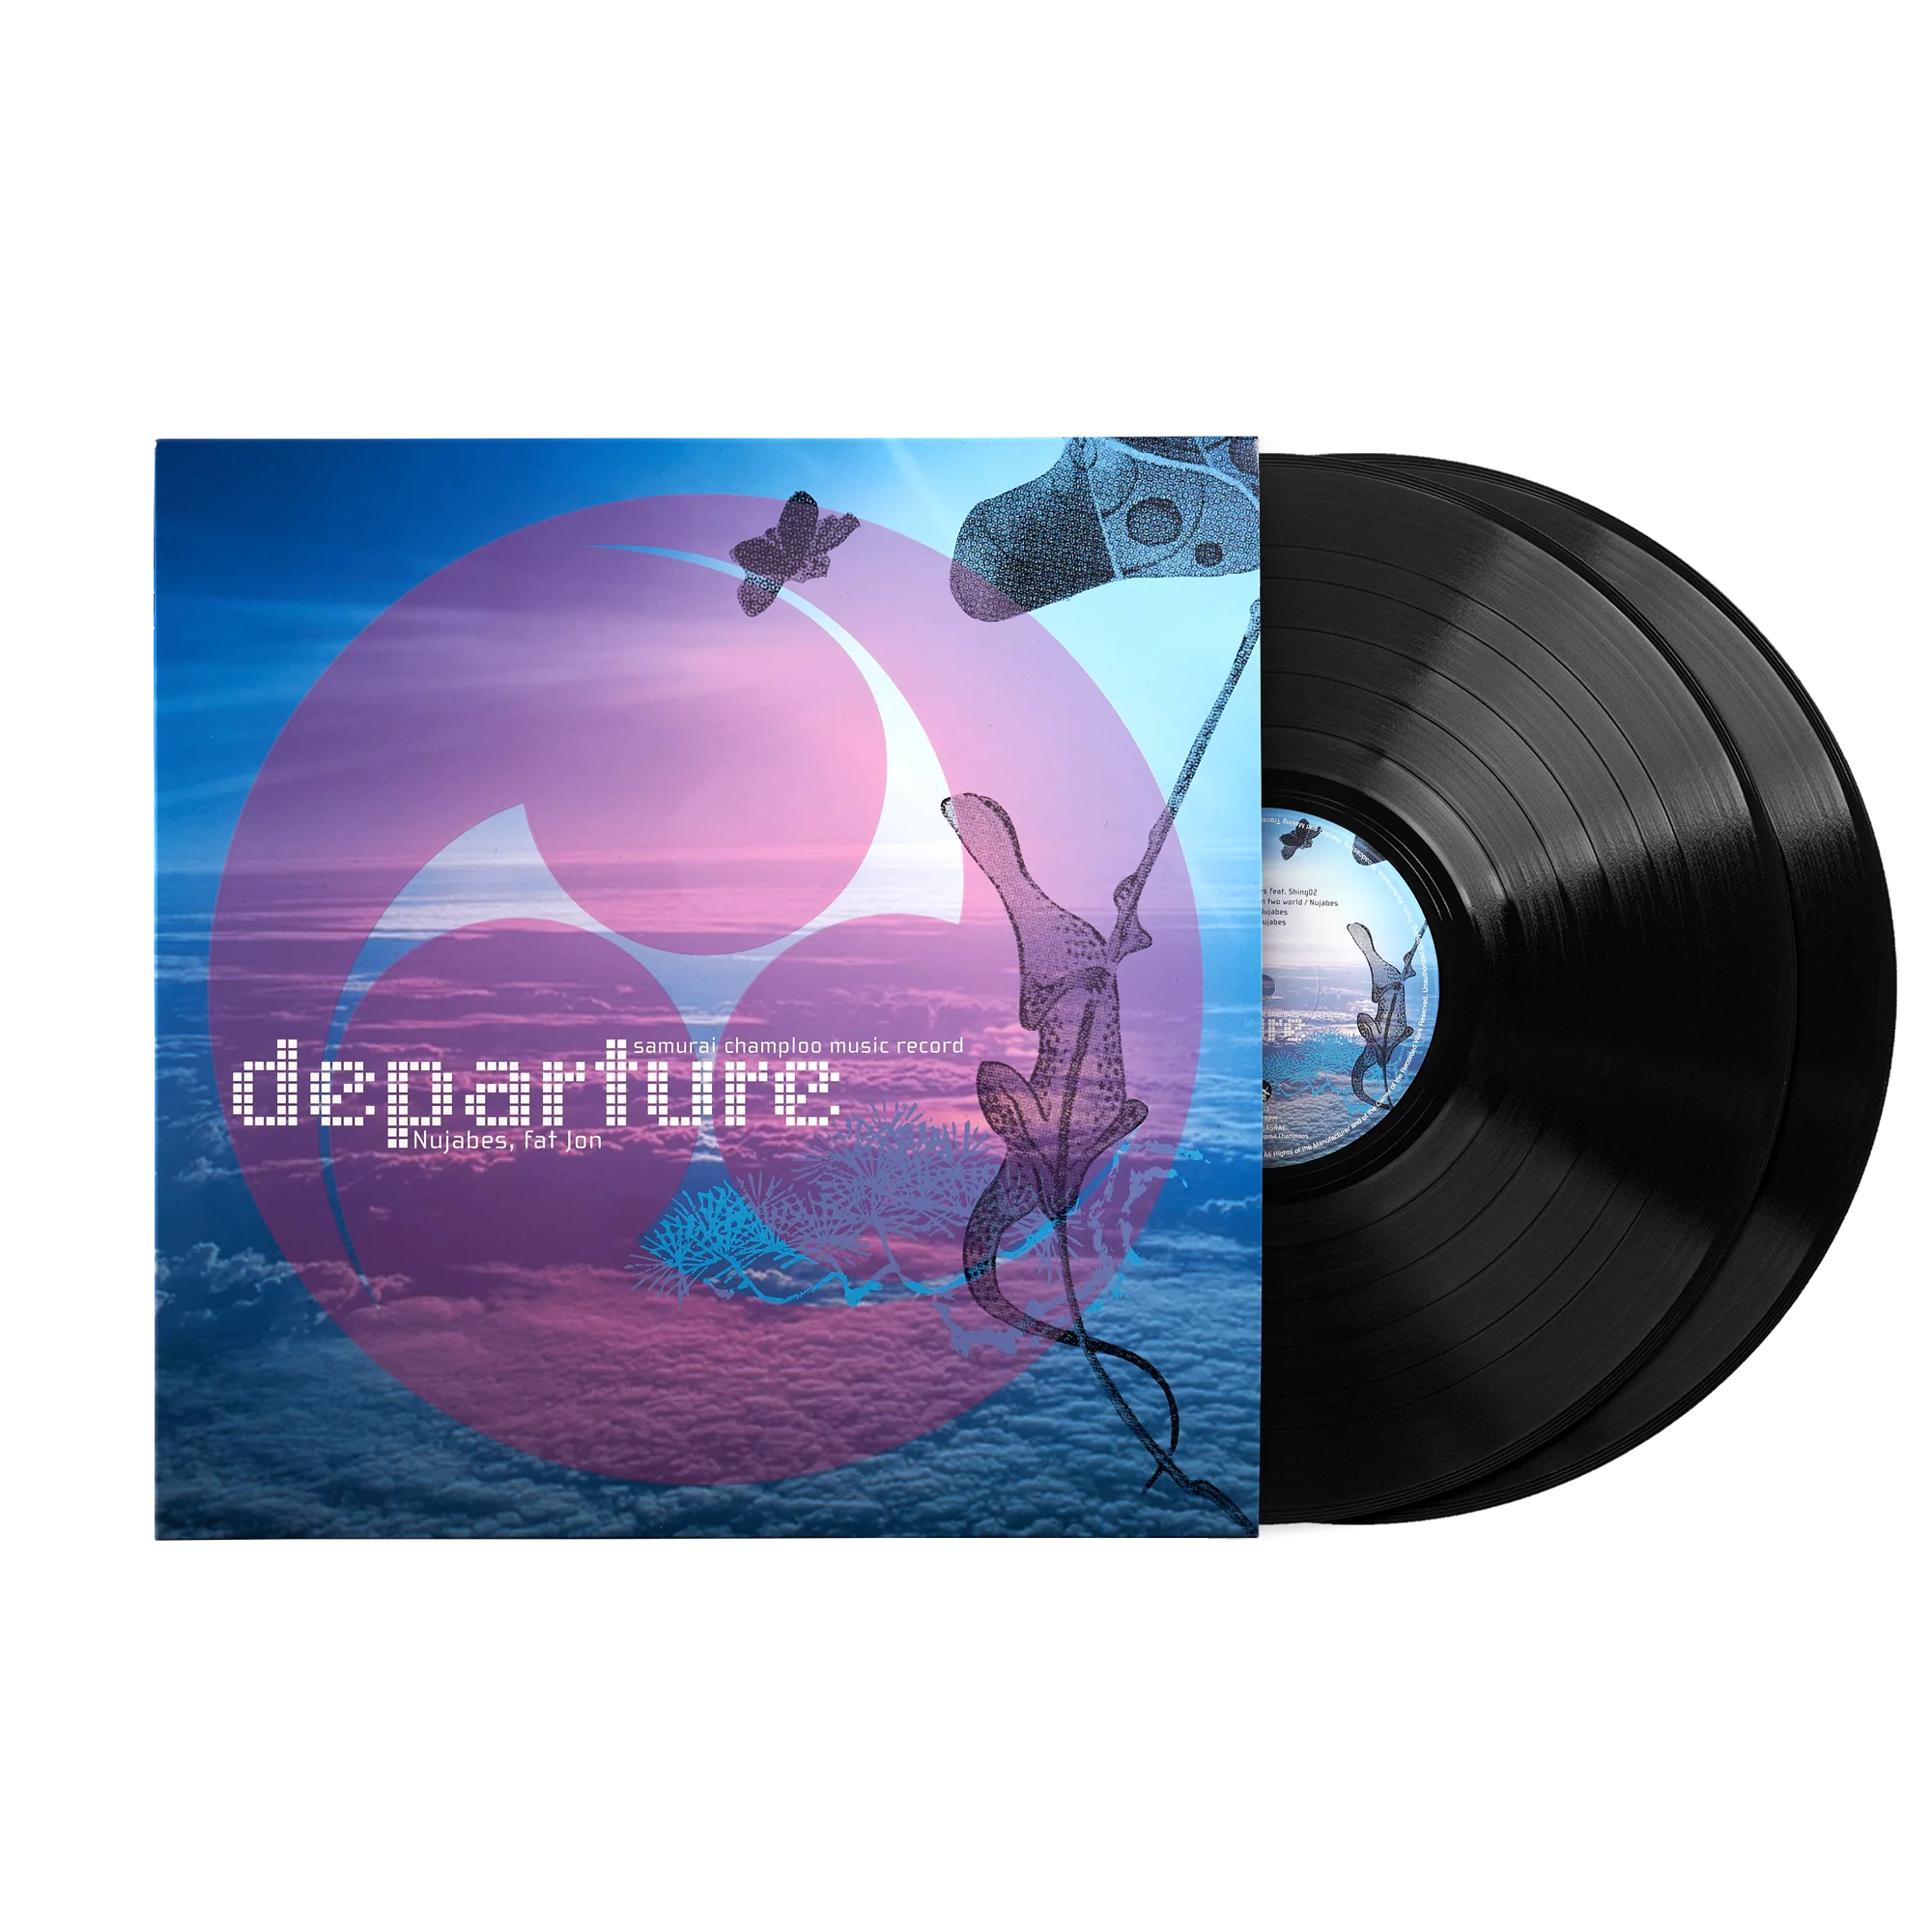 Nujabes and Fat Jon - Samurai Champloo Music Record: Departure